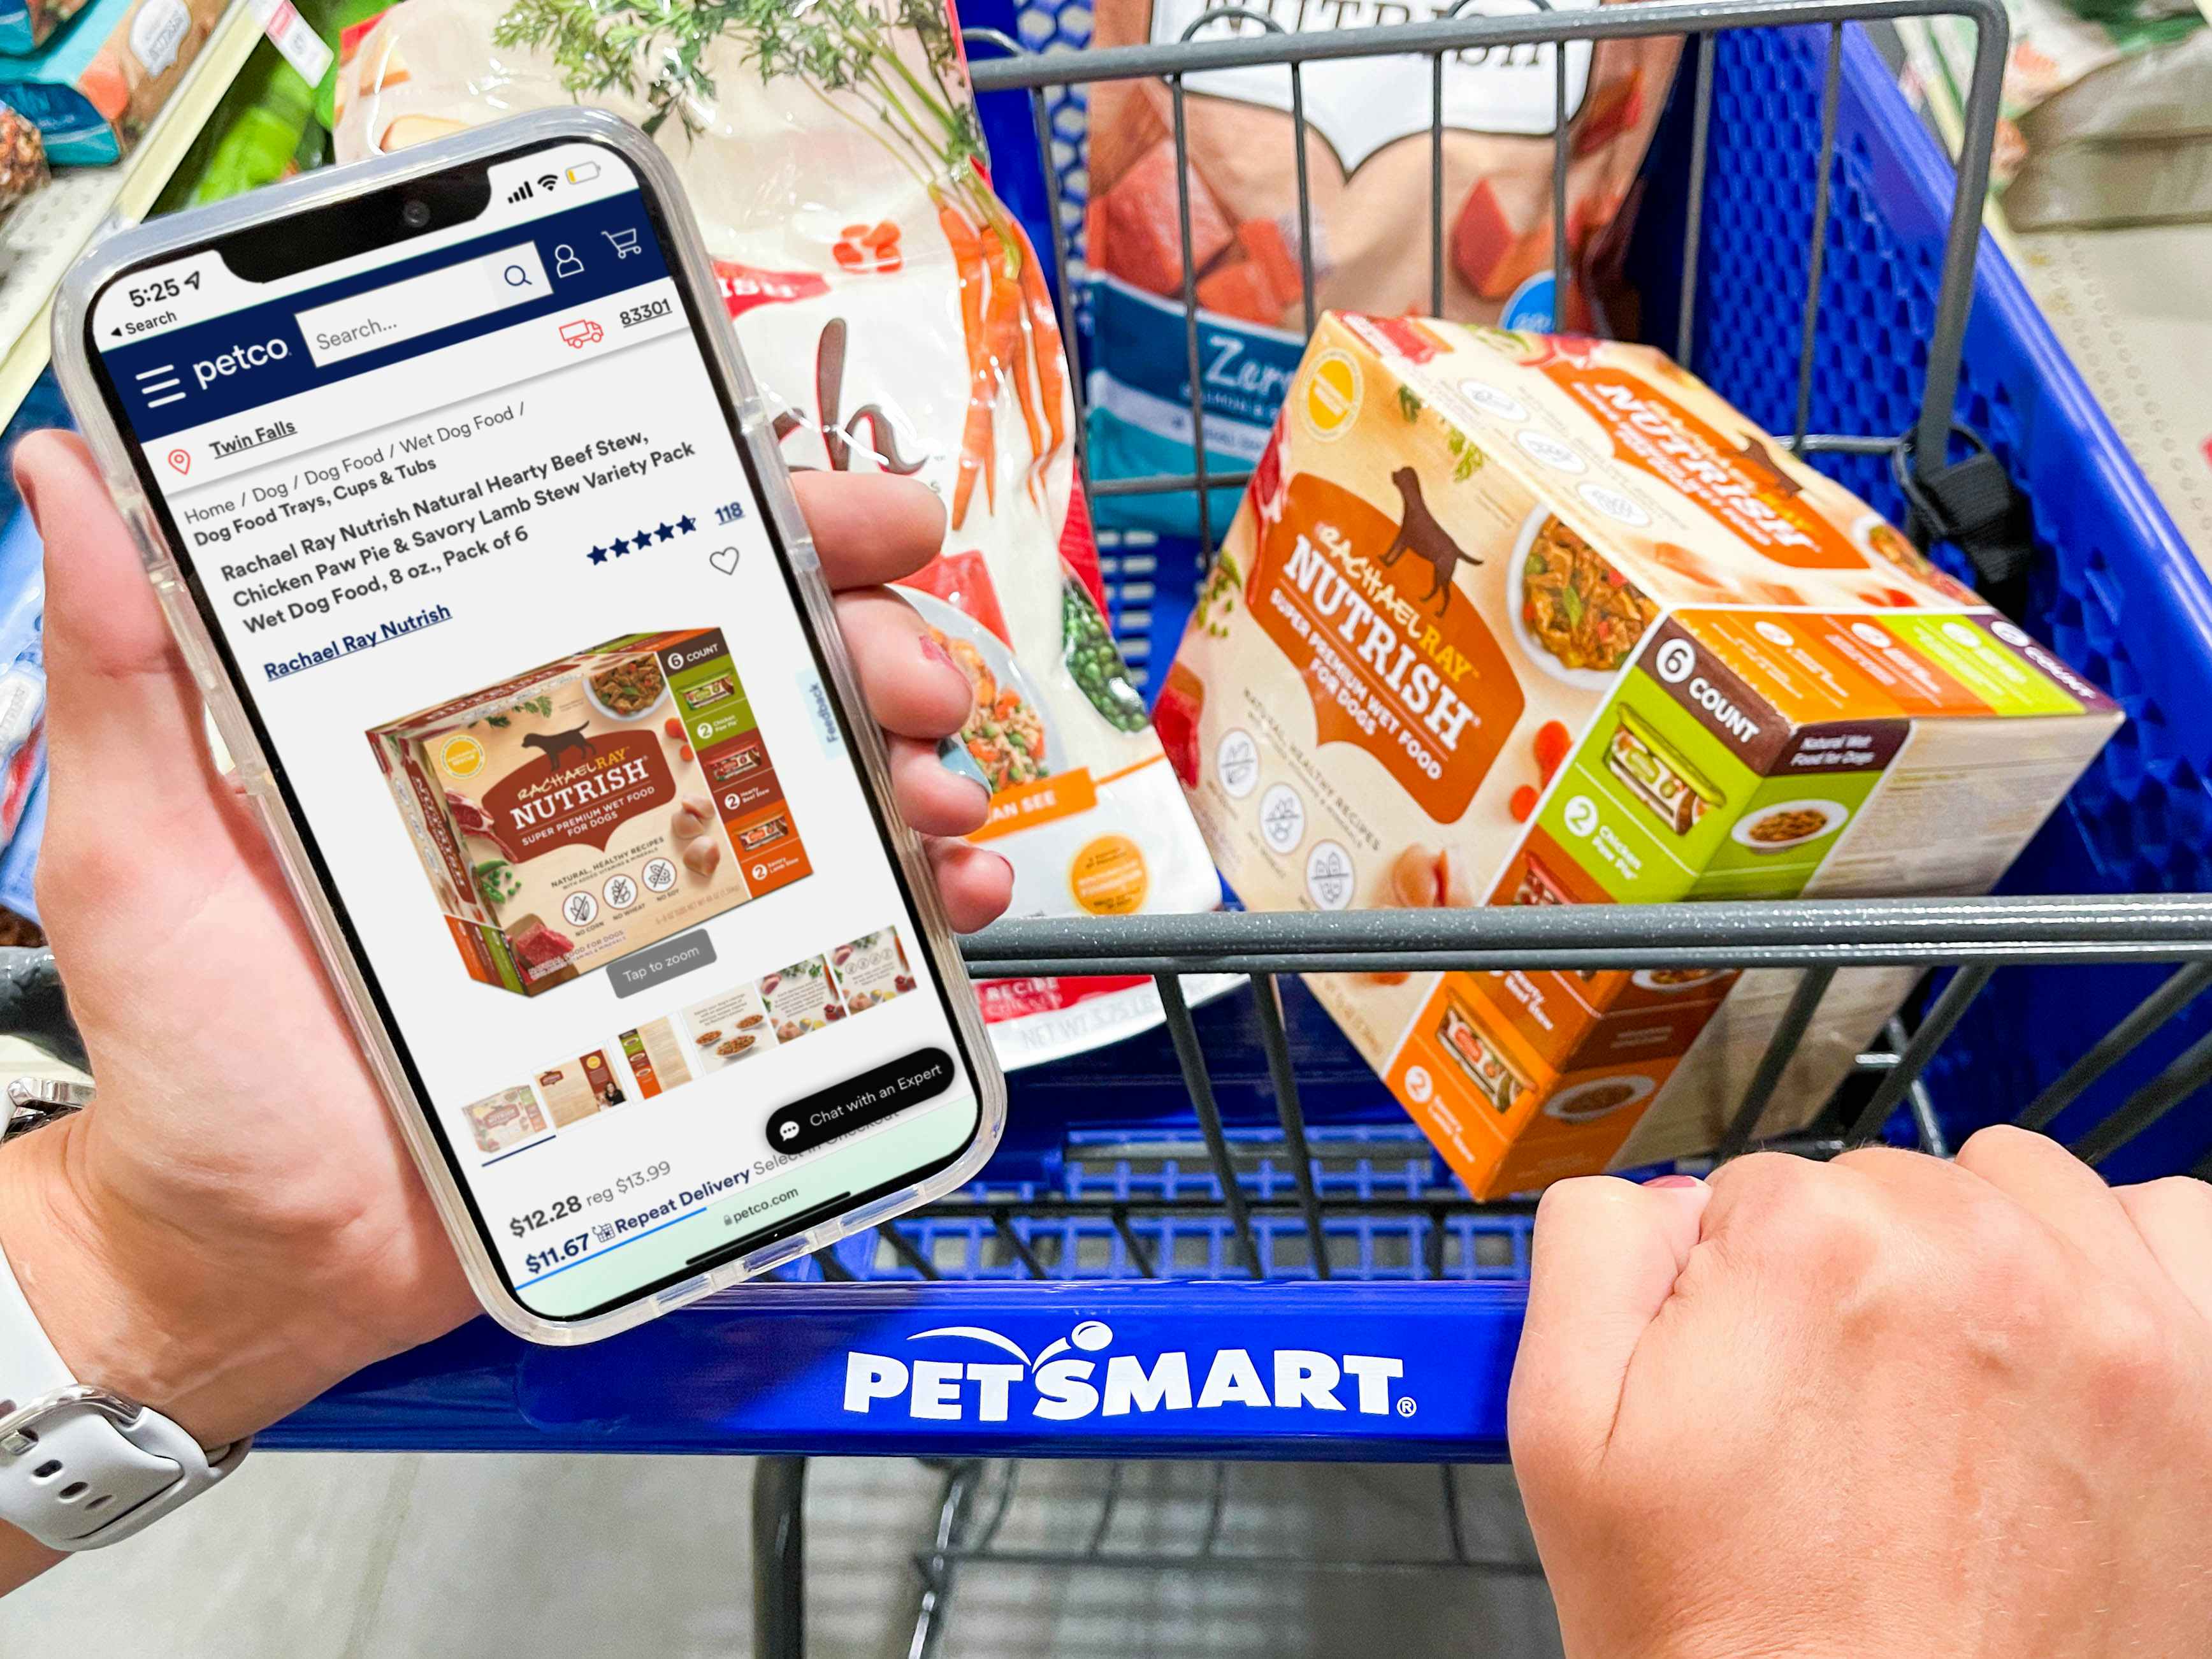 A person's hands, one holding a cellphone with the Petco website open to a product, and the other hand pushing a PetSmart shopping cart w...